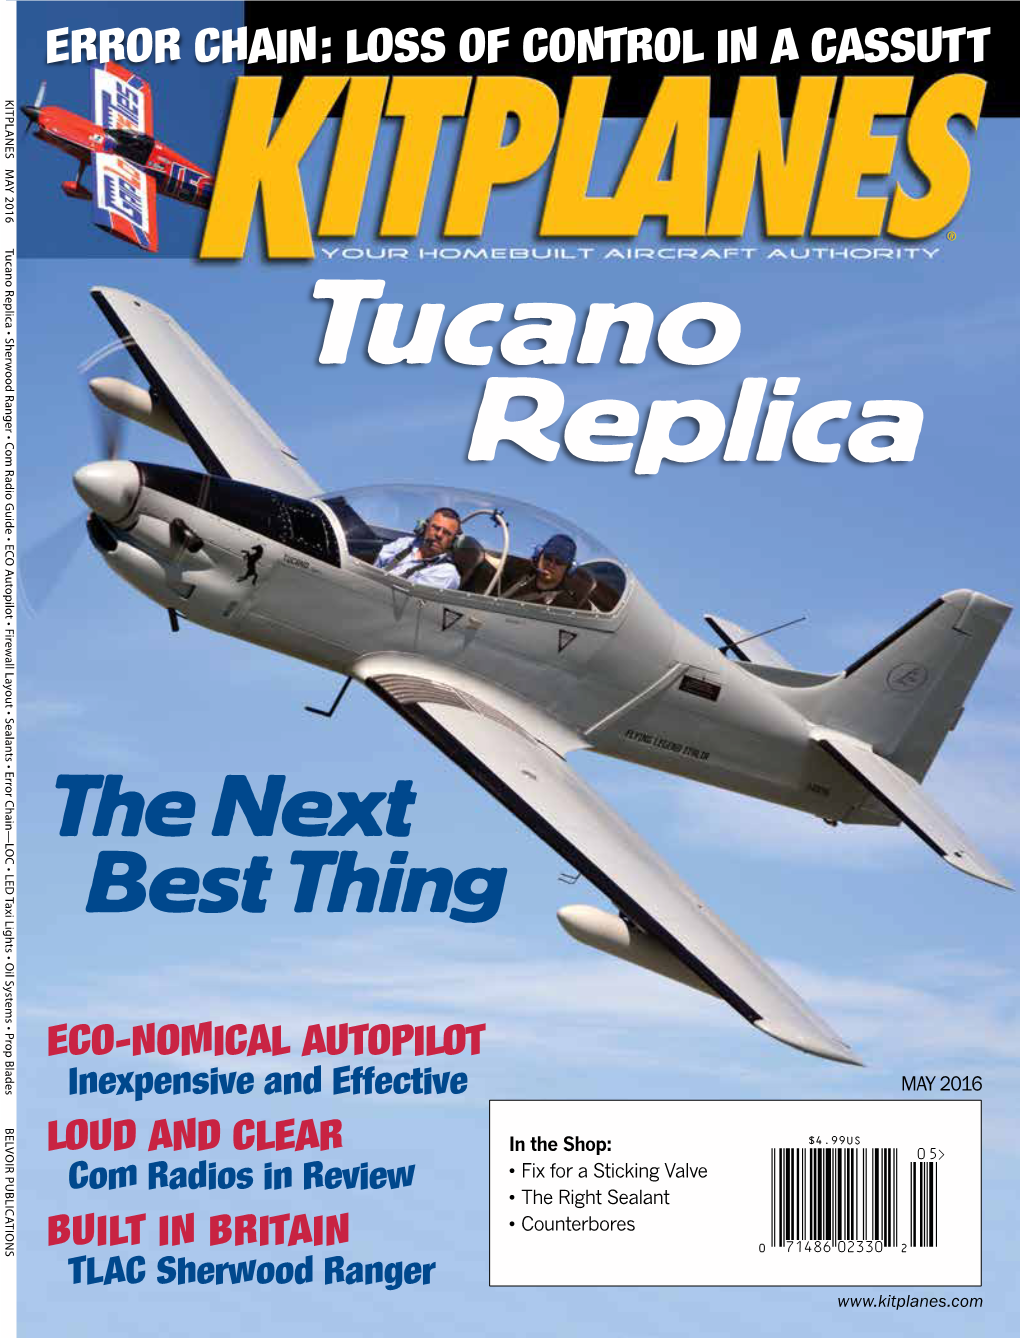 Tucano Replica: If You Can’T Own an Original, It’S the Next Best Thing